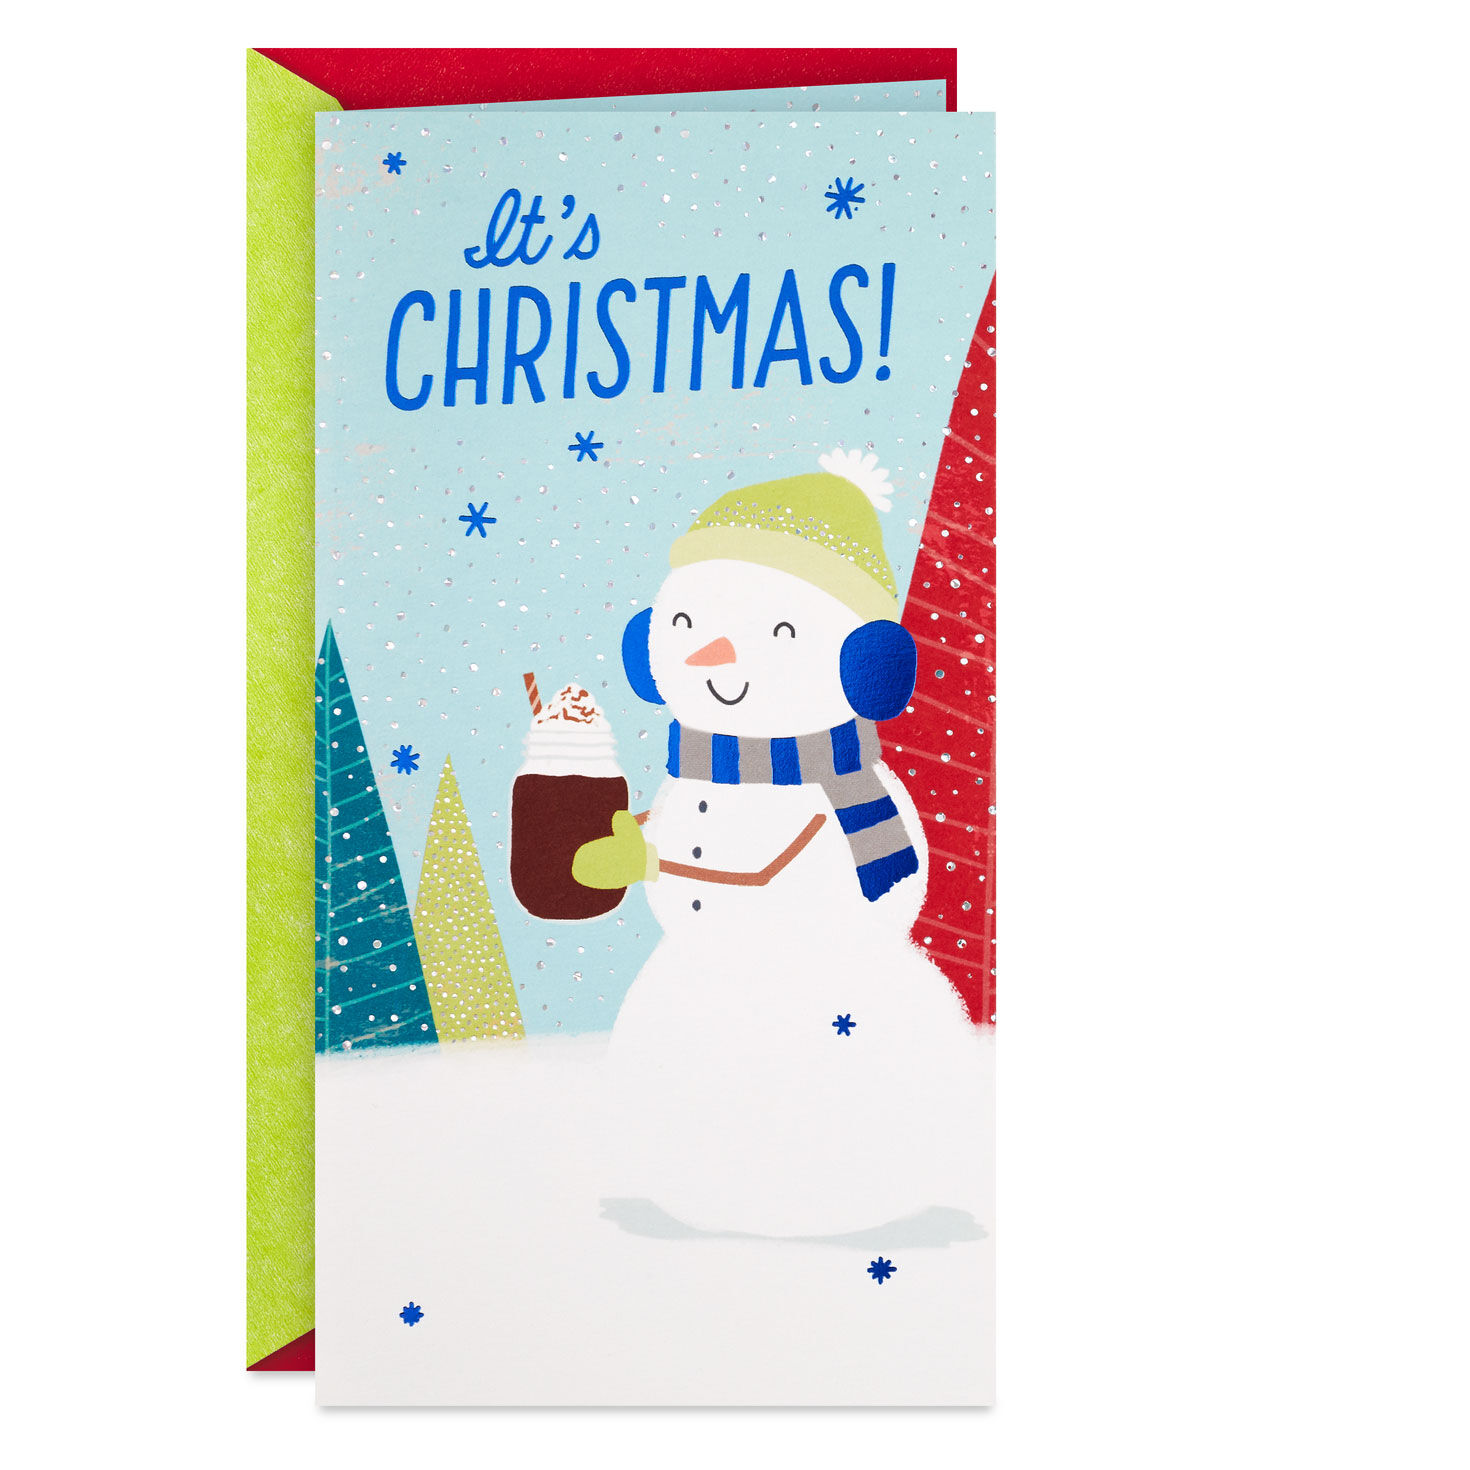 https://www.hallmark.com/dw/image/v2/AALB_PRD/on/demandware.static/-/Sites-hallmark-master/default/dwaac0a1ce/images/finished-goods/products/459XMH6036/Smiling-Snowman-Money-Holder-Christmas-Card_459XMH6036_01.jpg?sfrm=jpg